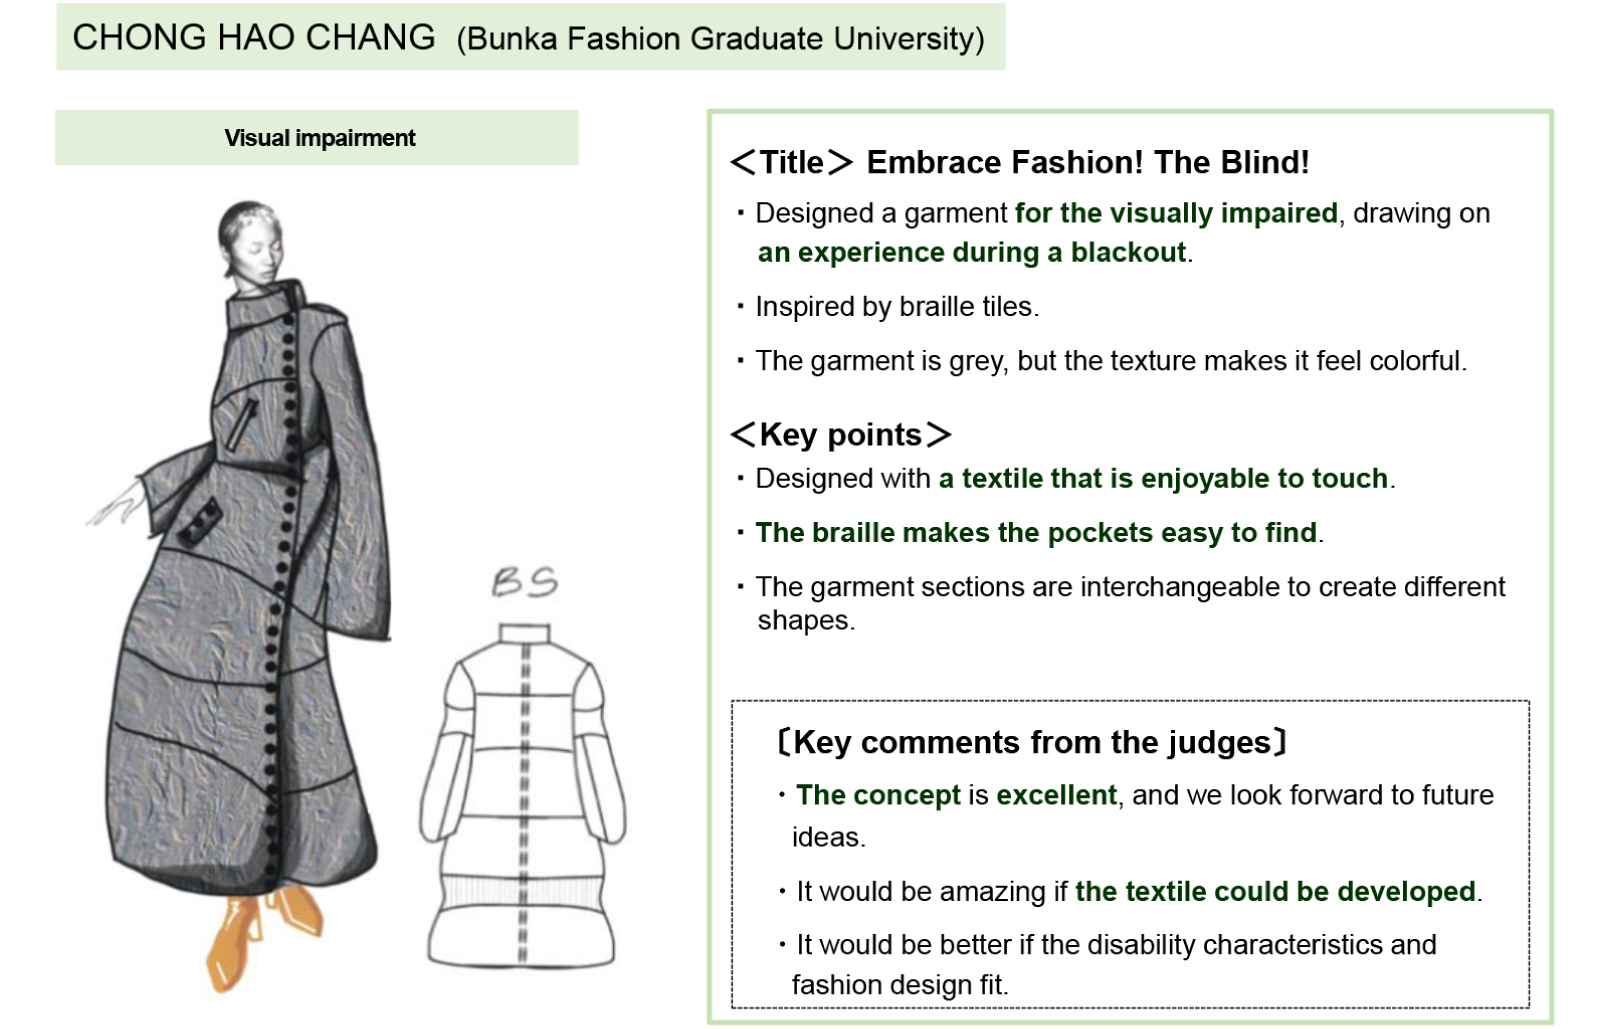 Embrace Fashion! The Blind!